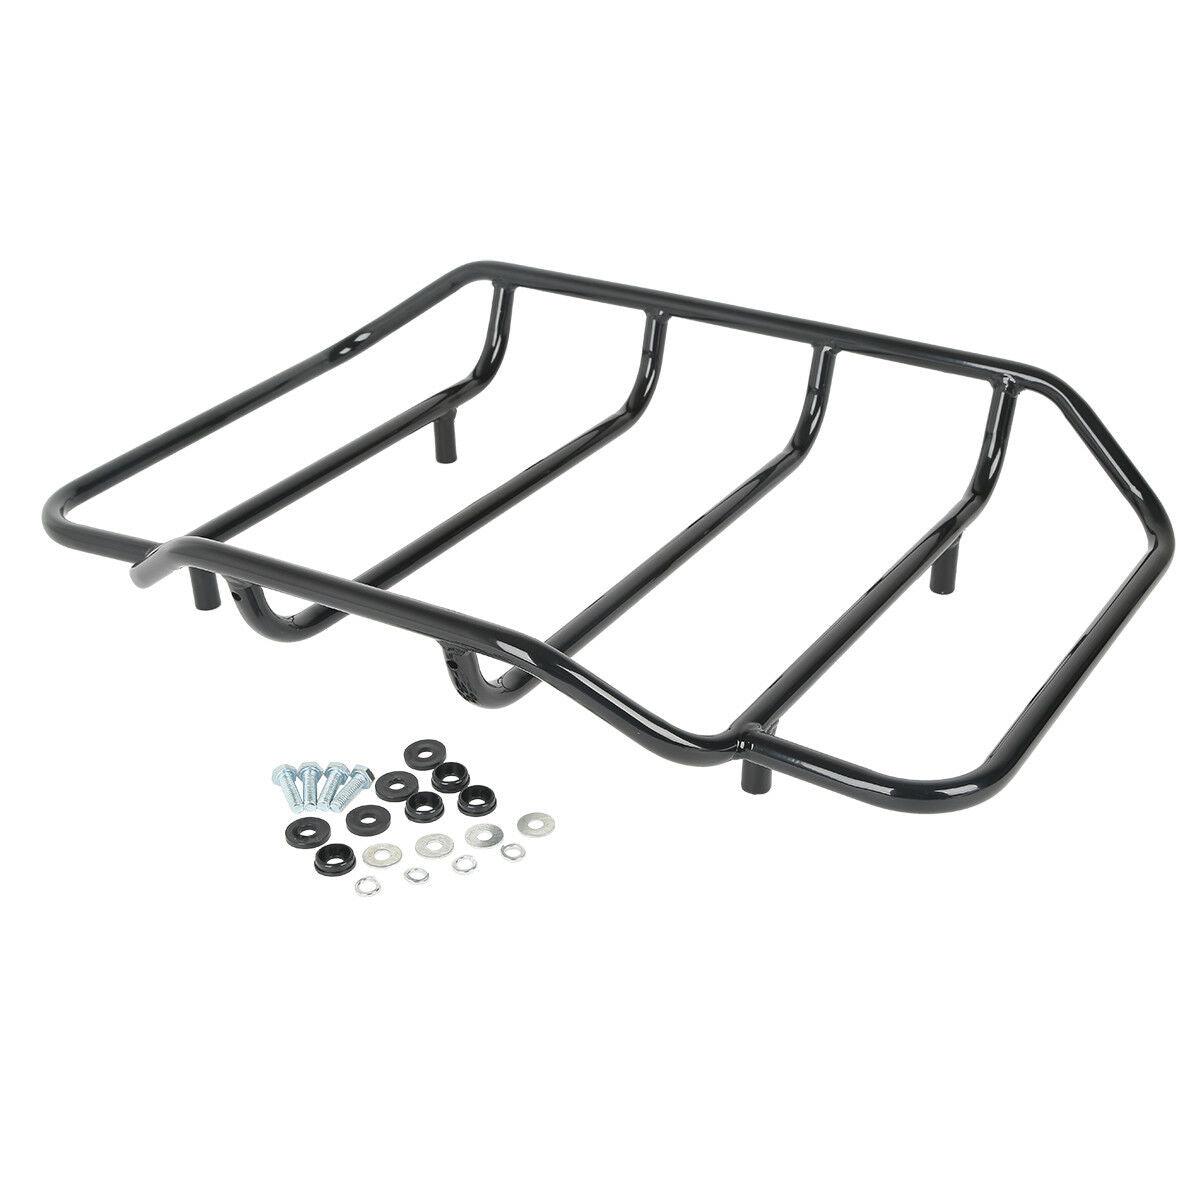 King Pack Trunk Pad Rack W/ Base Plate Fit For Harley Tour Pak Road Glide 09-13 - Moto Life Products